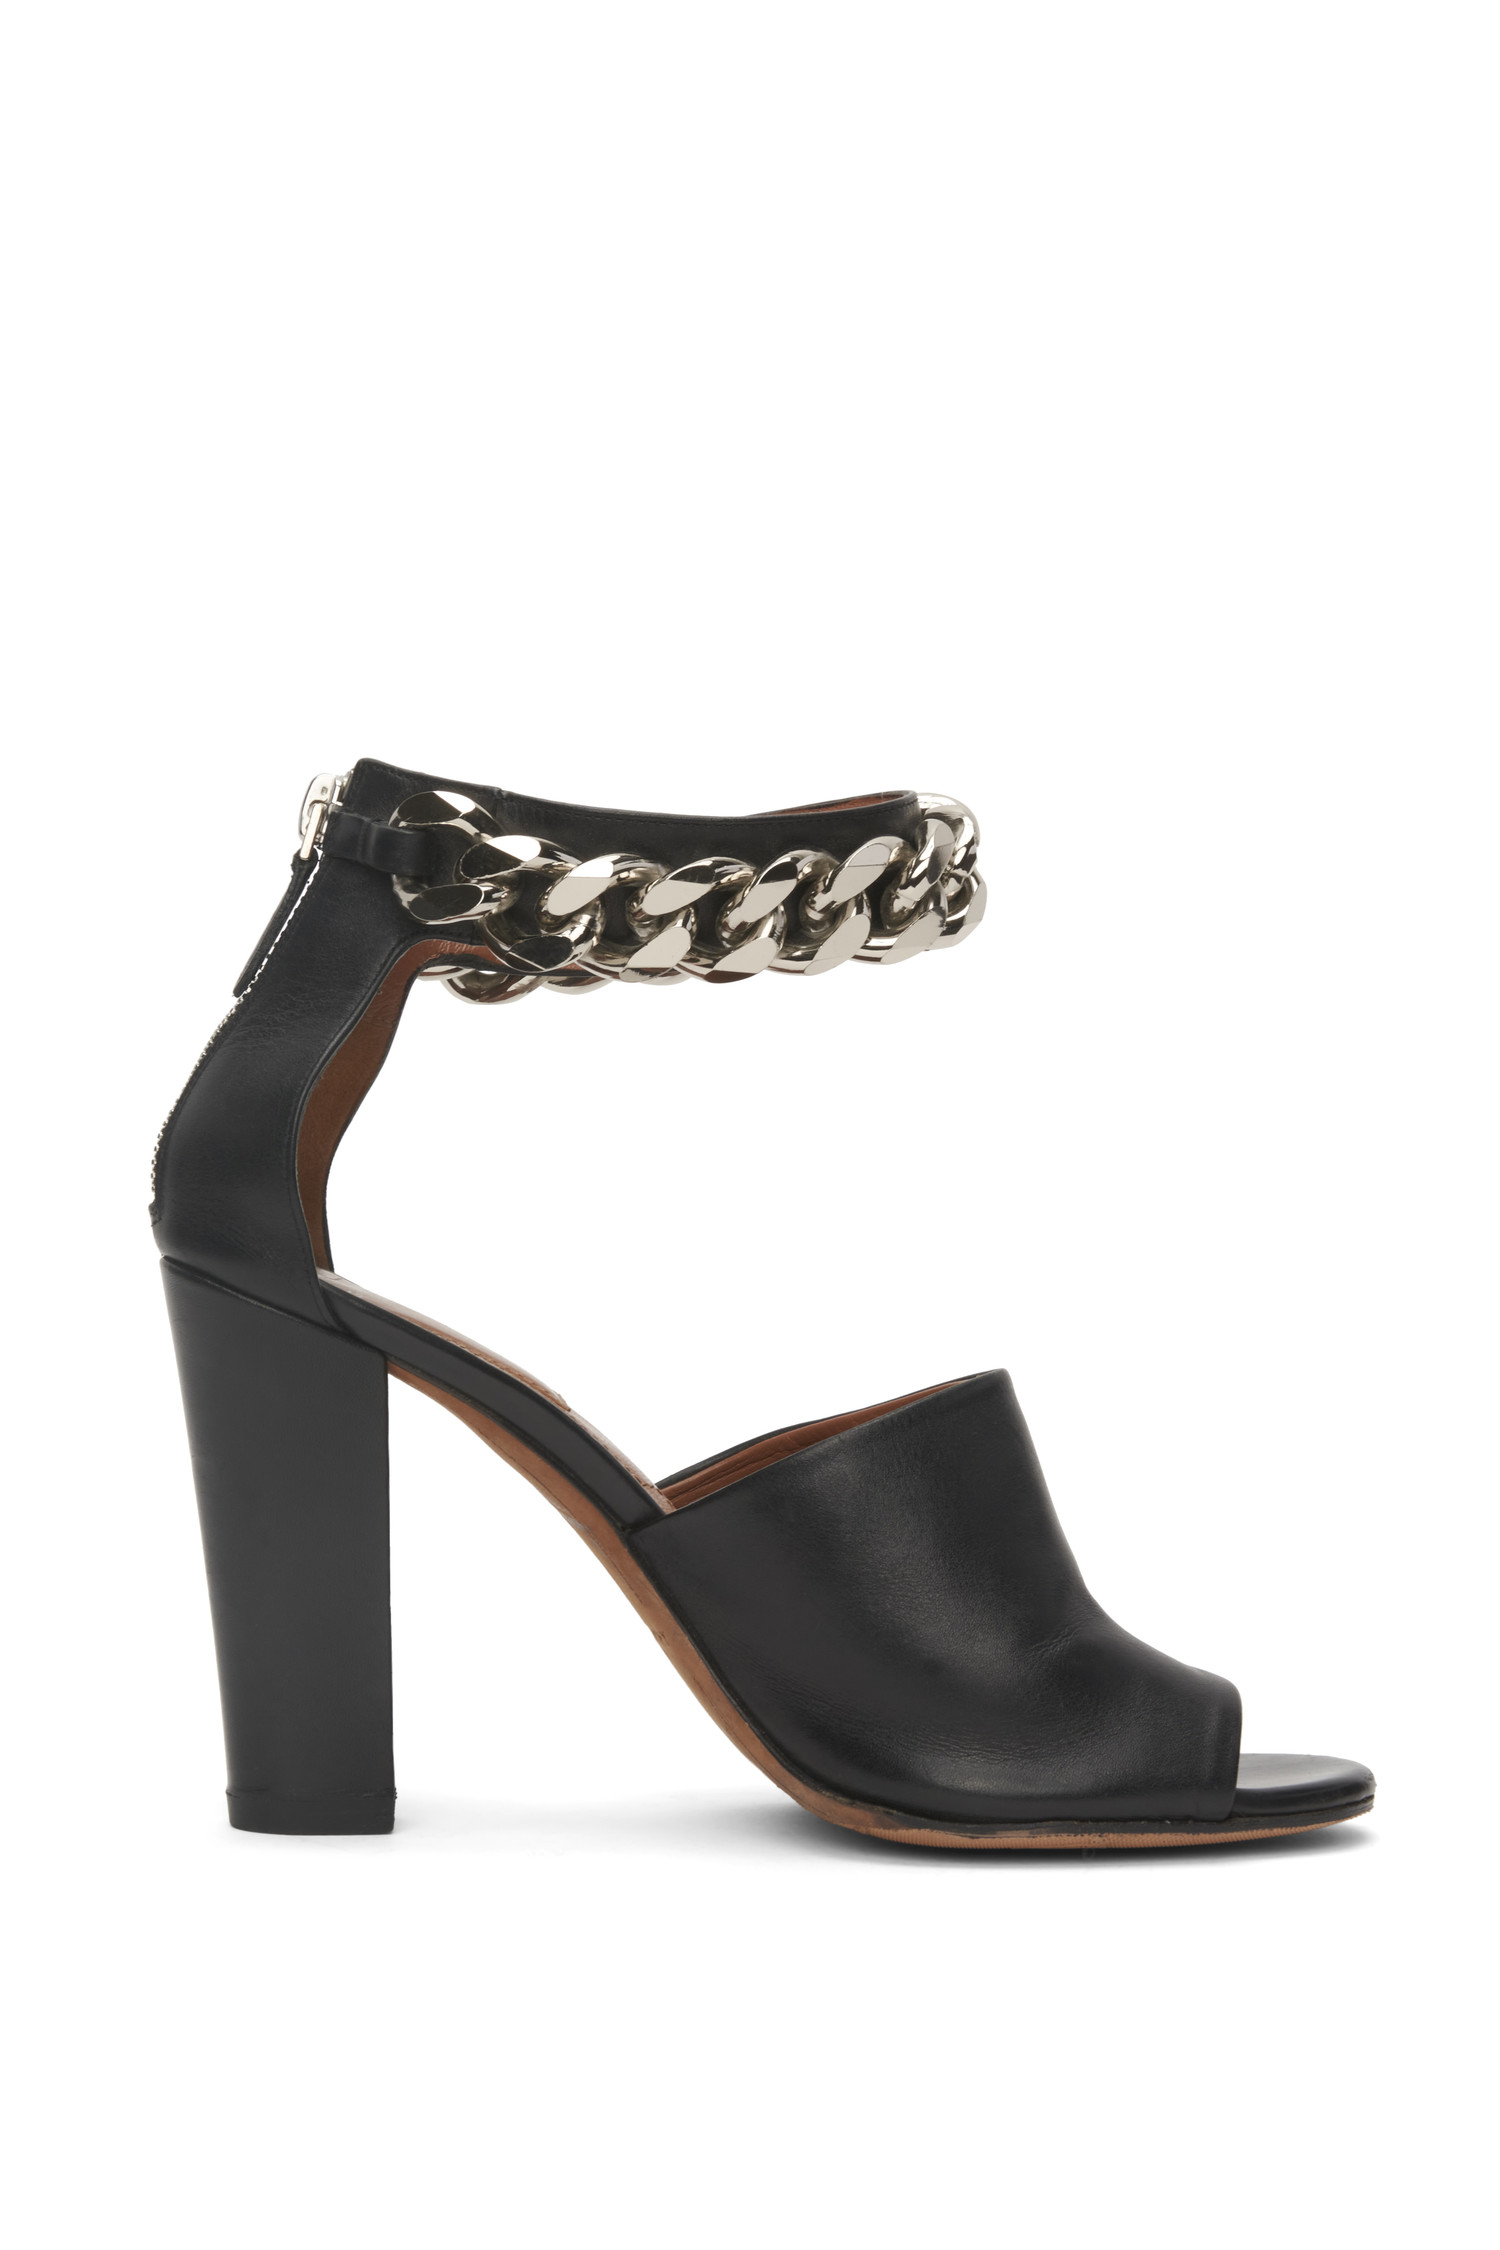 givenchy high heel sandals